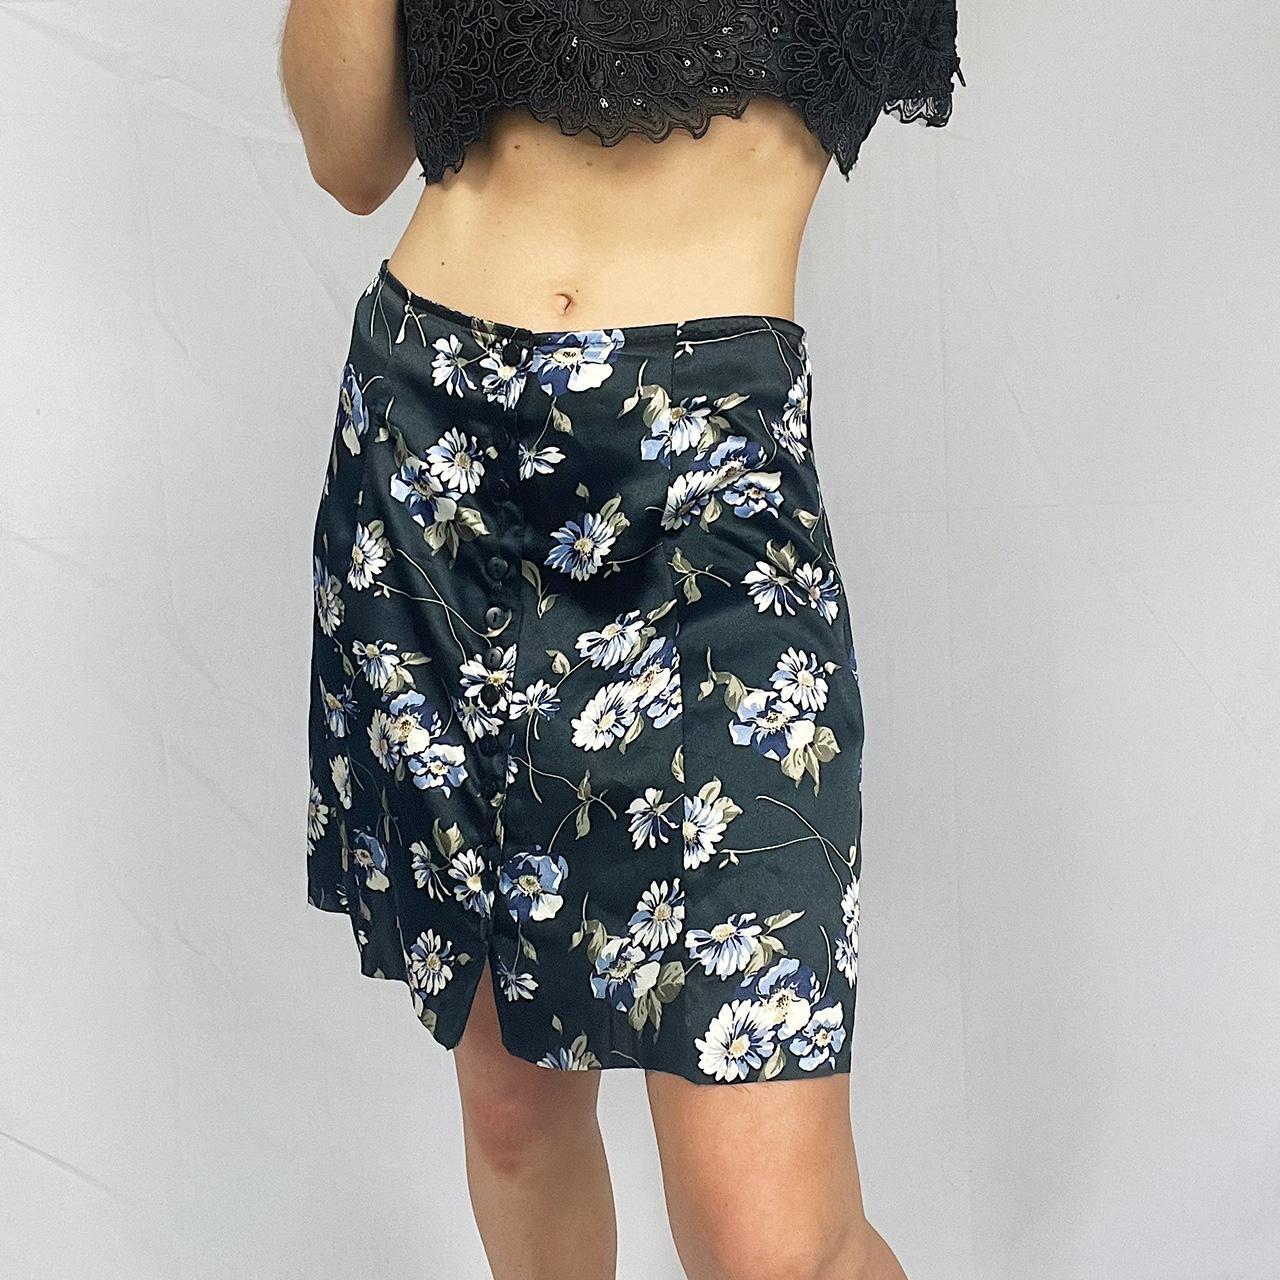 Product Image 3 - floral button down skirt 🪐

black